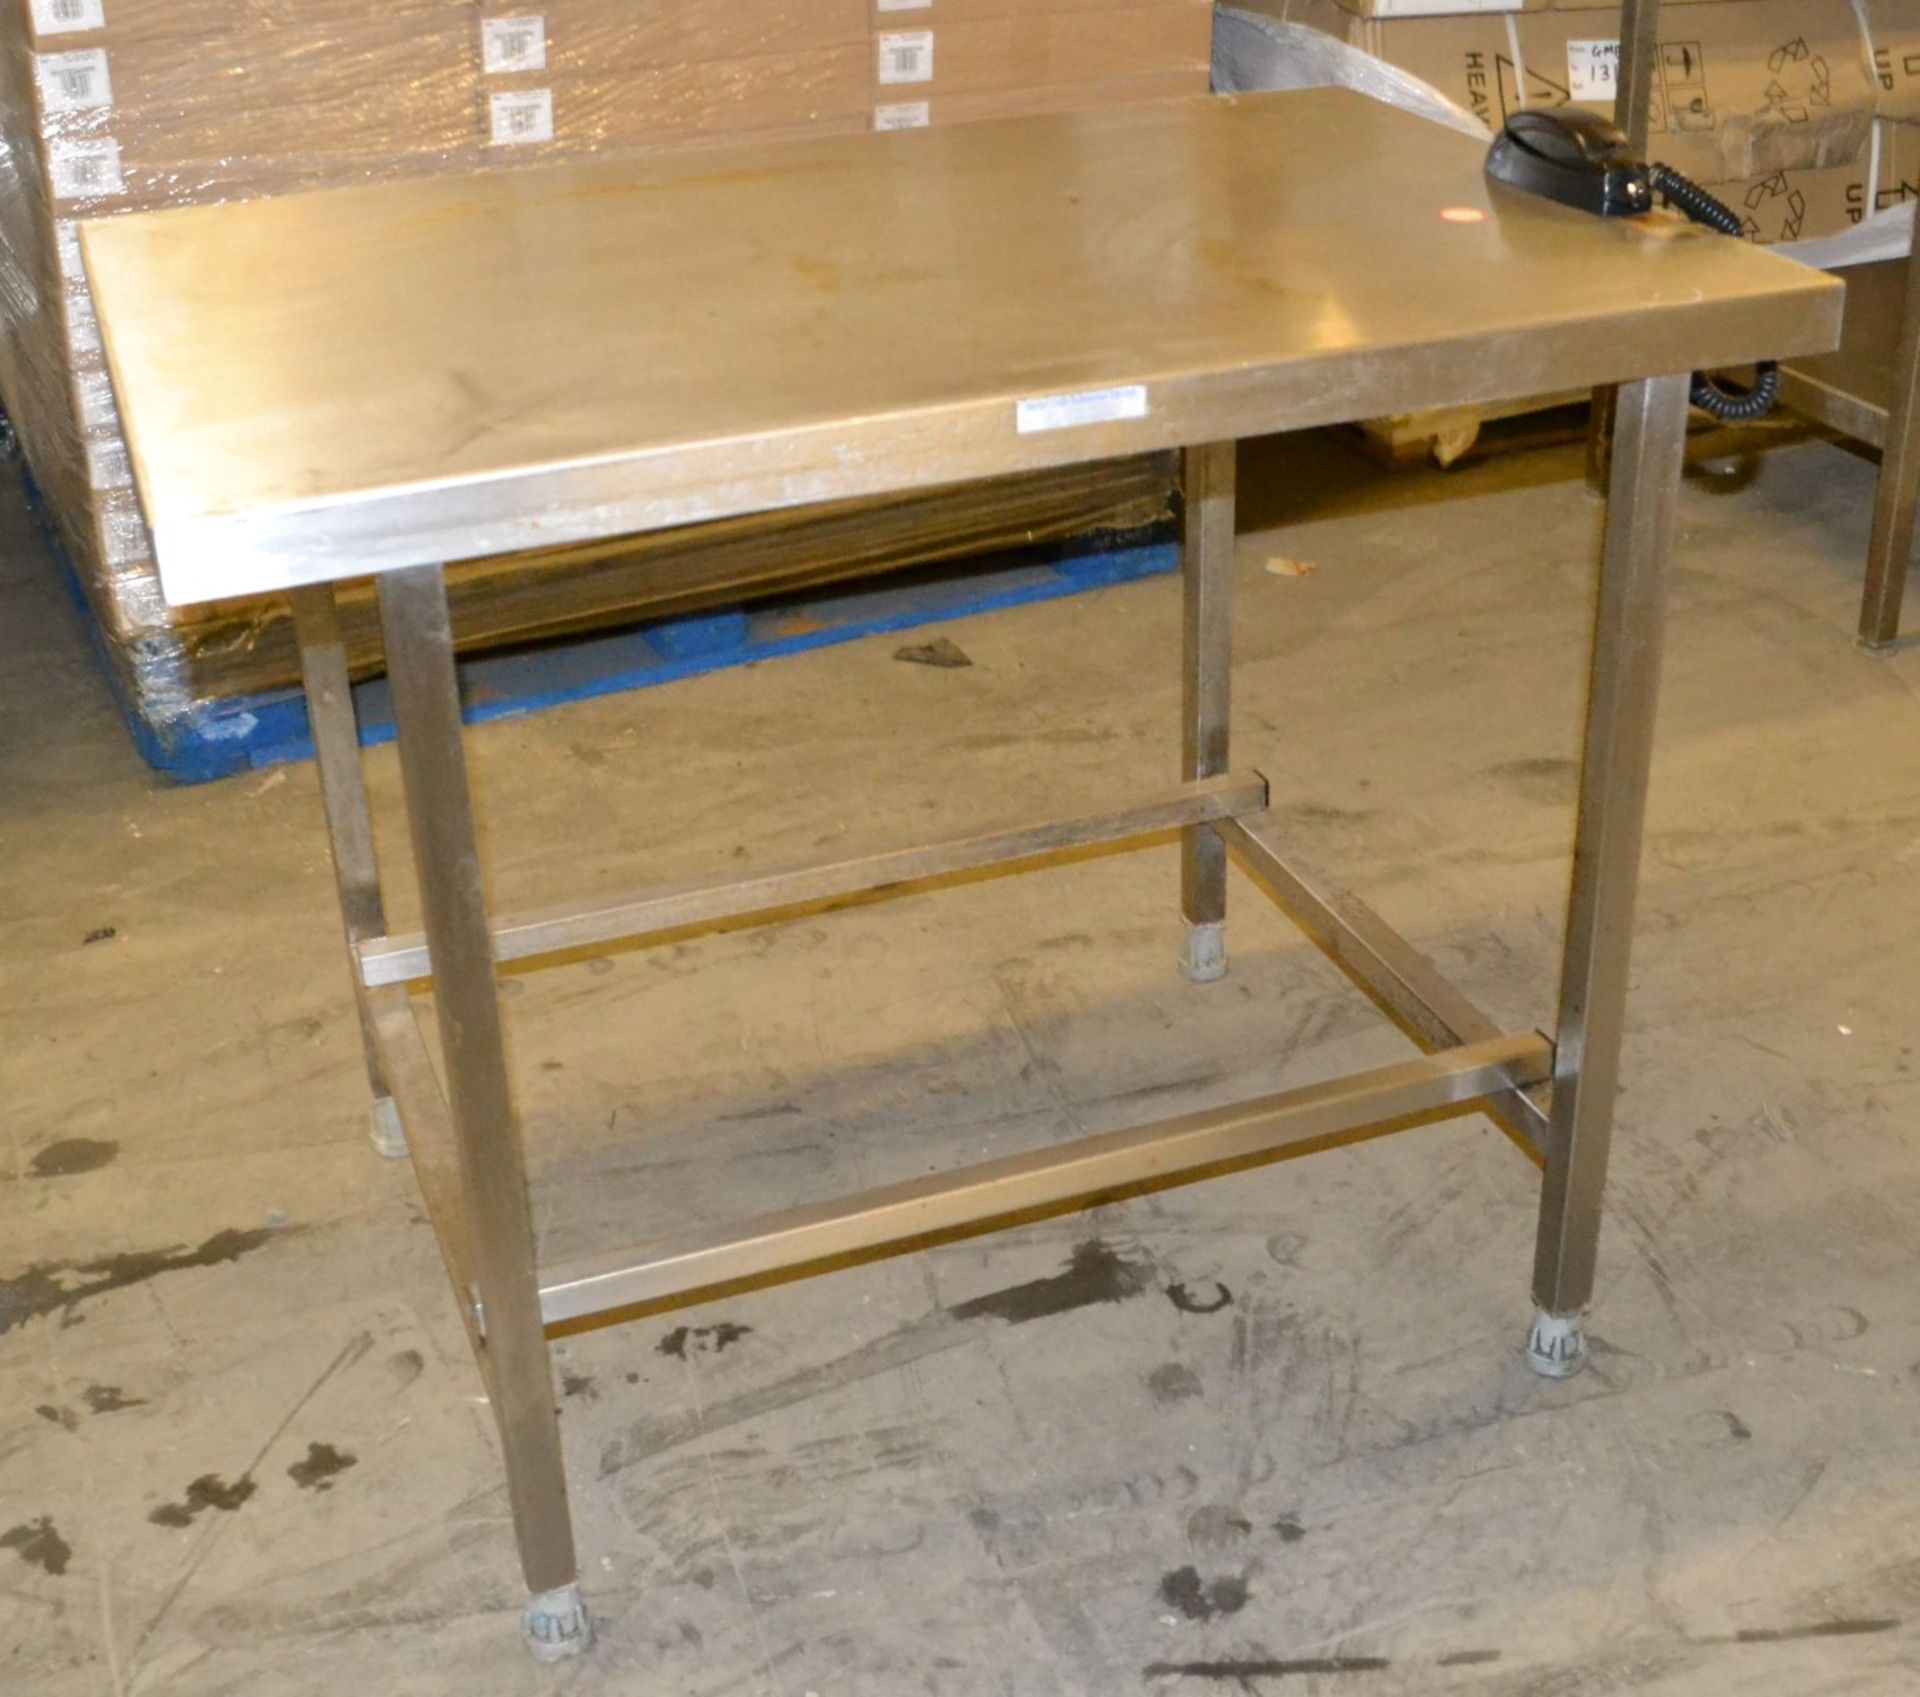 1 x Stainless Steel Prep Table With S3 Security Tag Device - Dimensions: 93 x 61 x 75cm - Ref: MC137